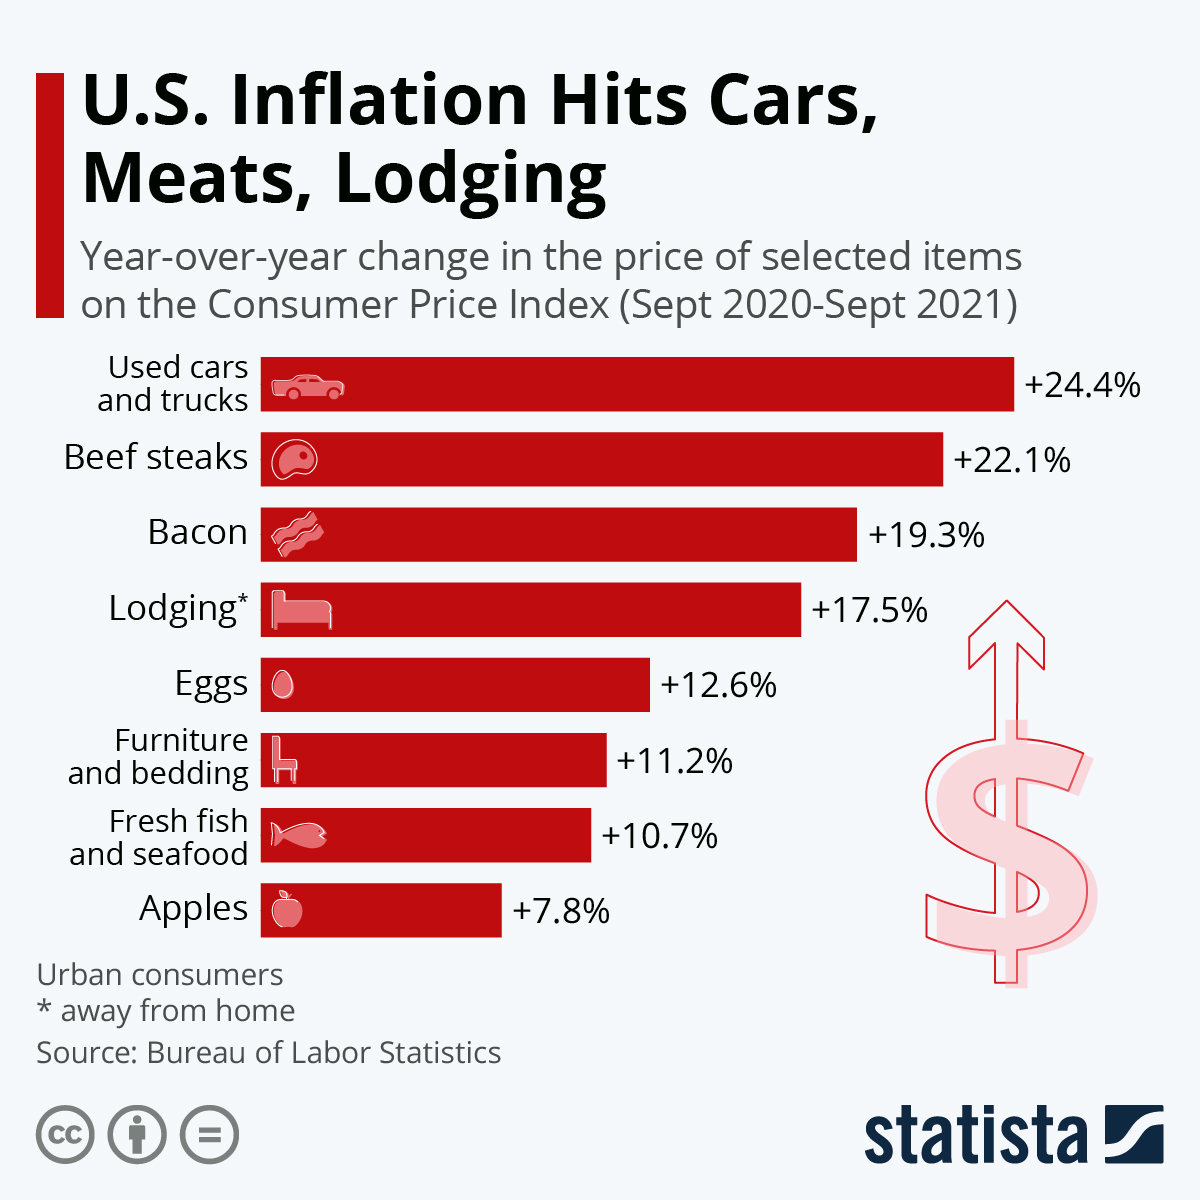 U.S. Inflation Hits Cars, Meats, Lodging